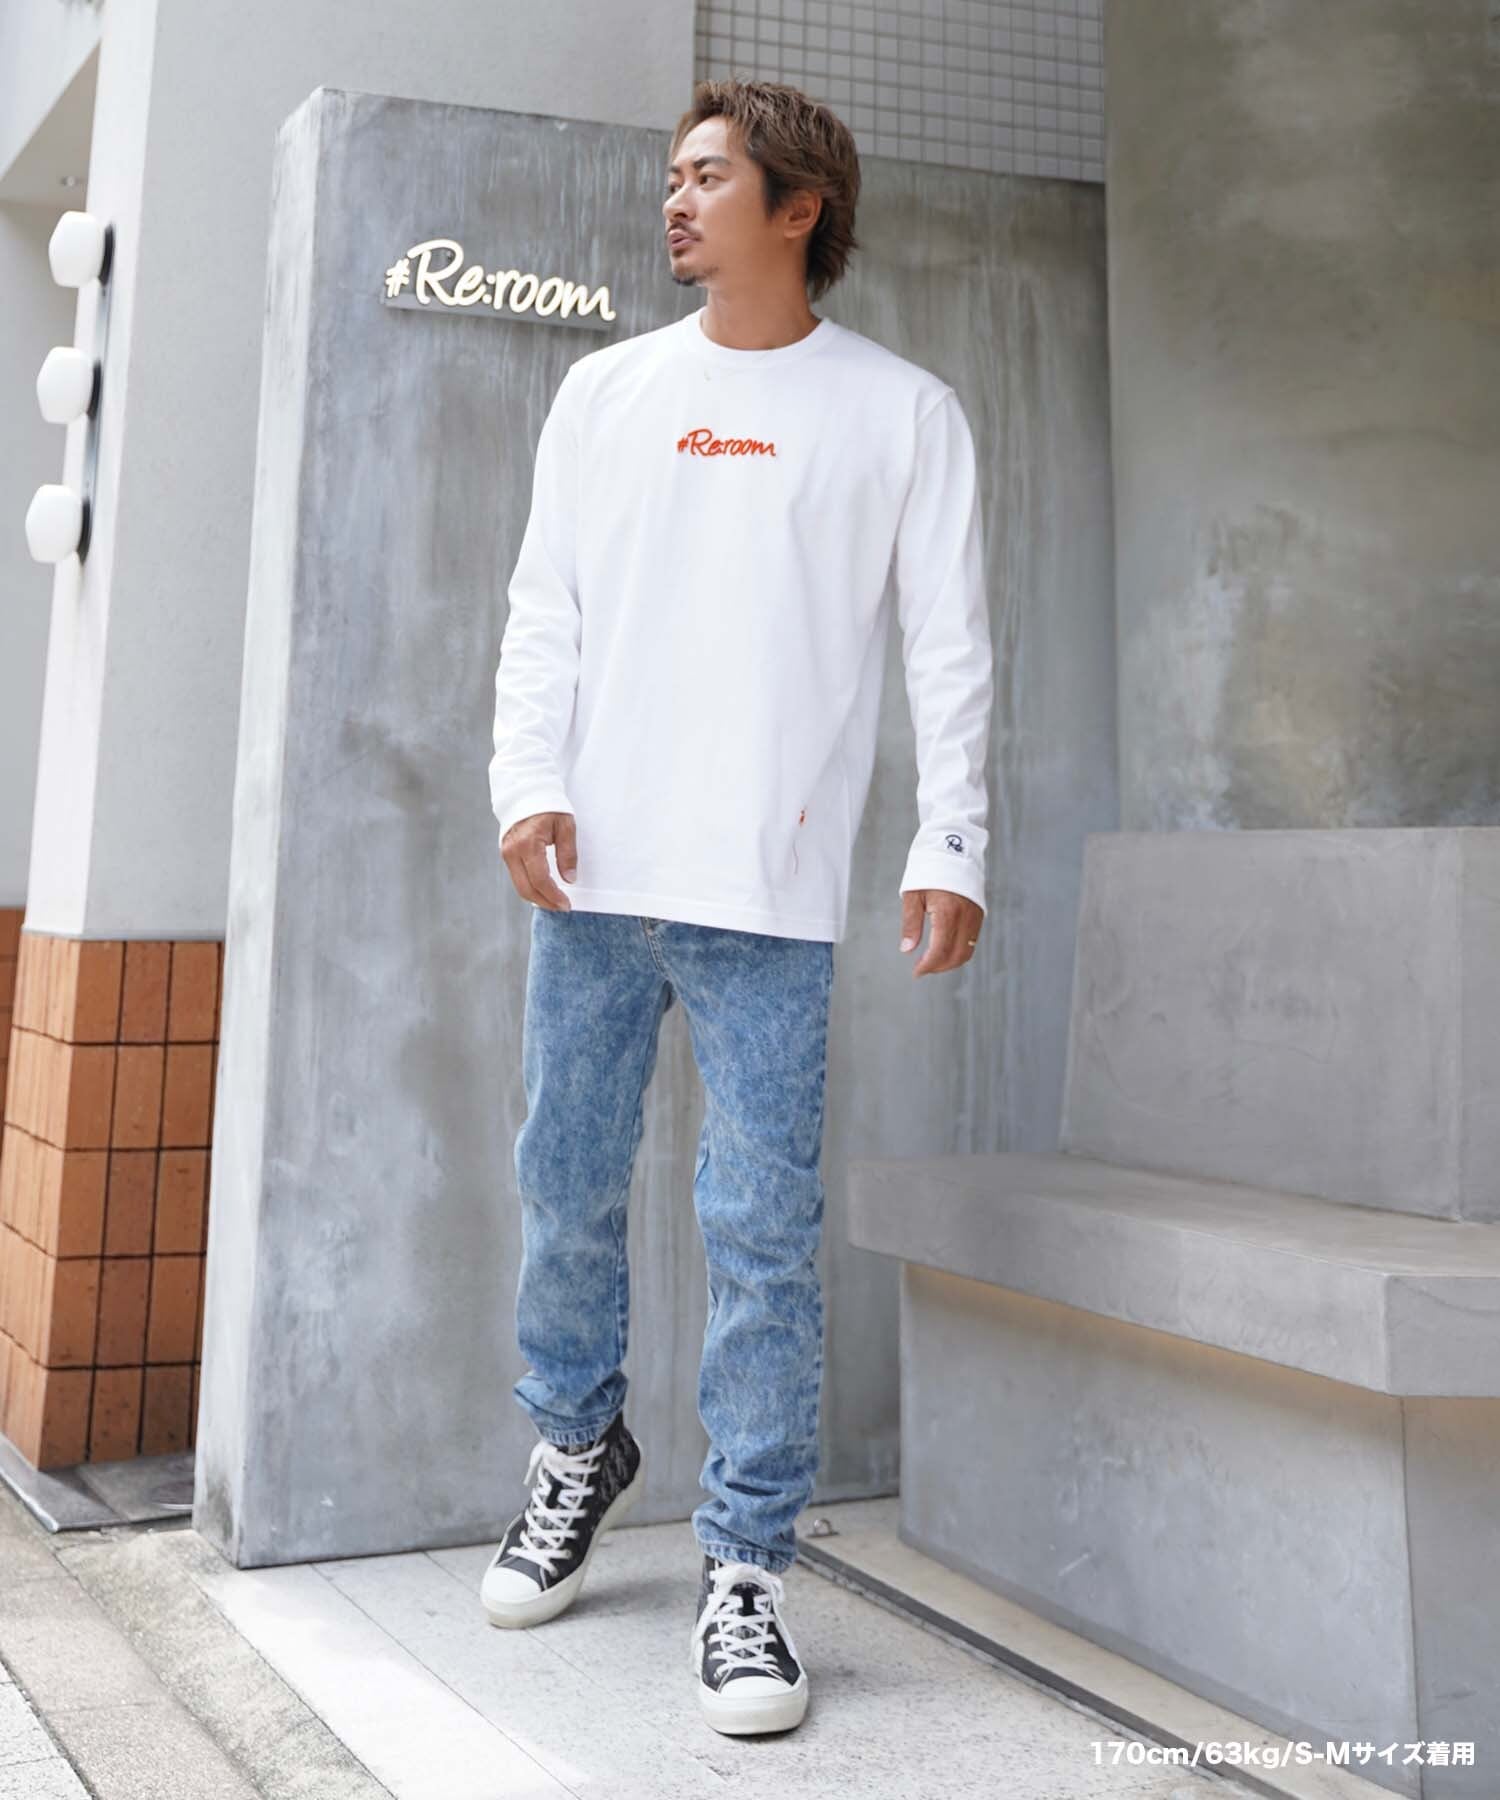 【#Re:room】3D LOGO EMBROIDERY LONG SLEEVE［REC706］ | #Re:room（リルーム）